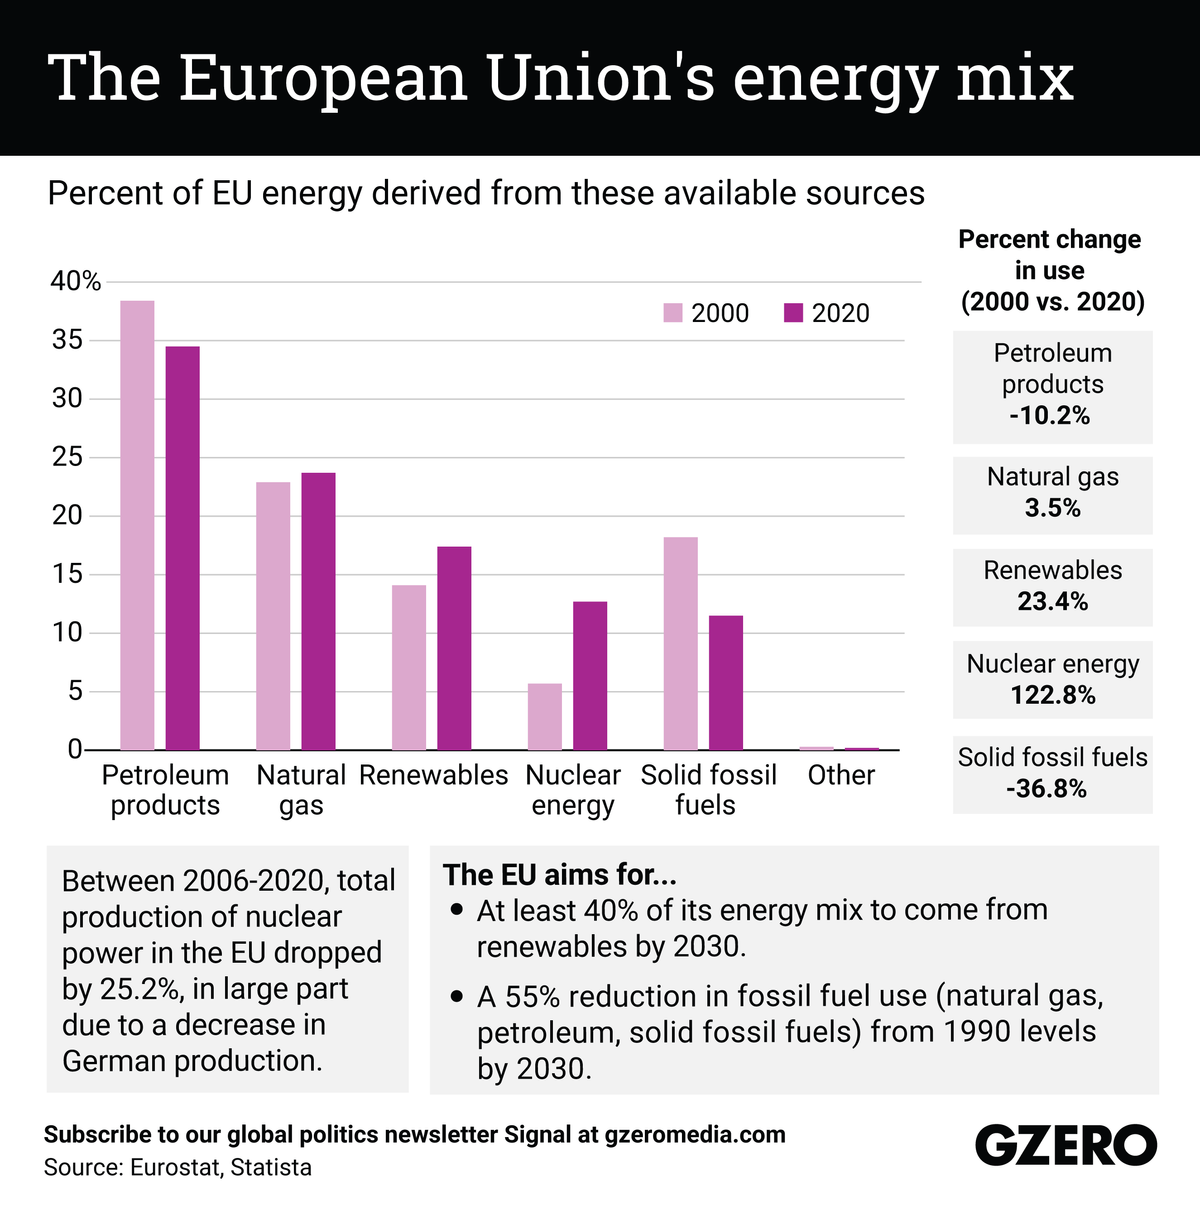 The Graphic Truth: The European Union's energy mix